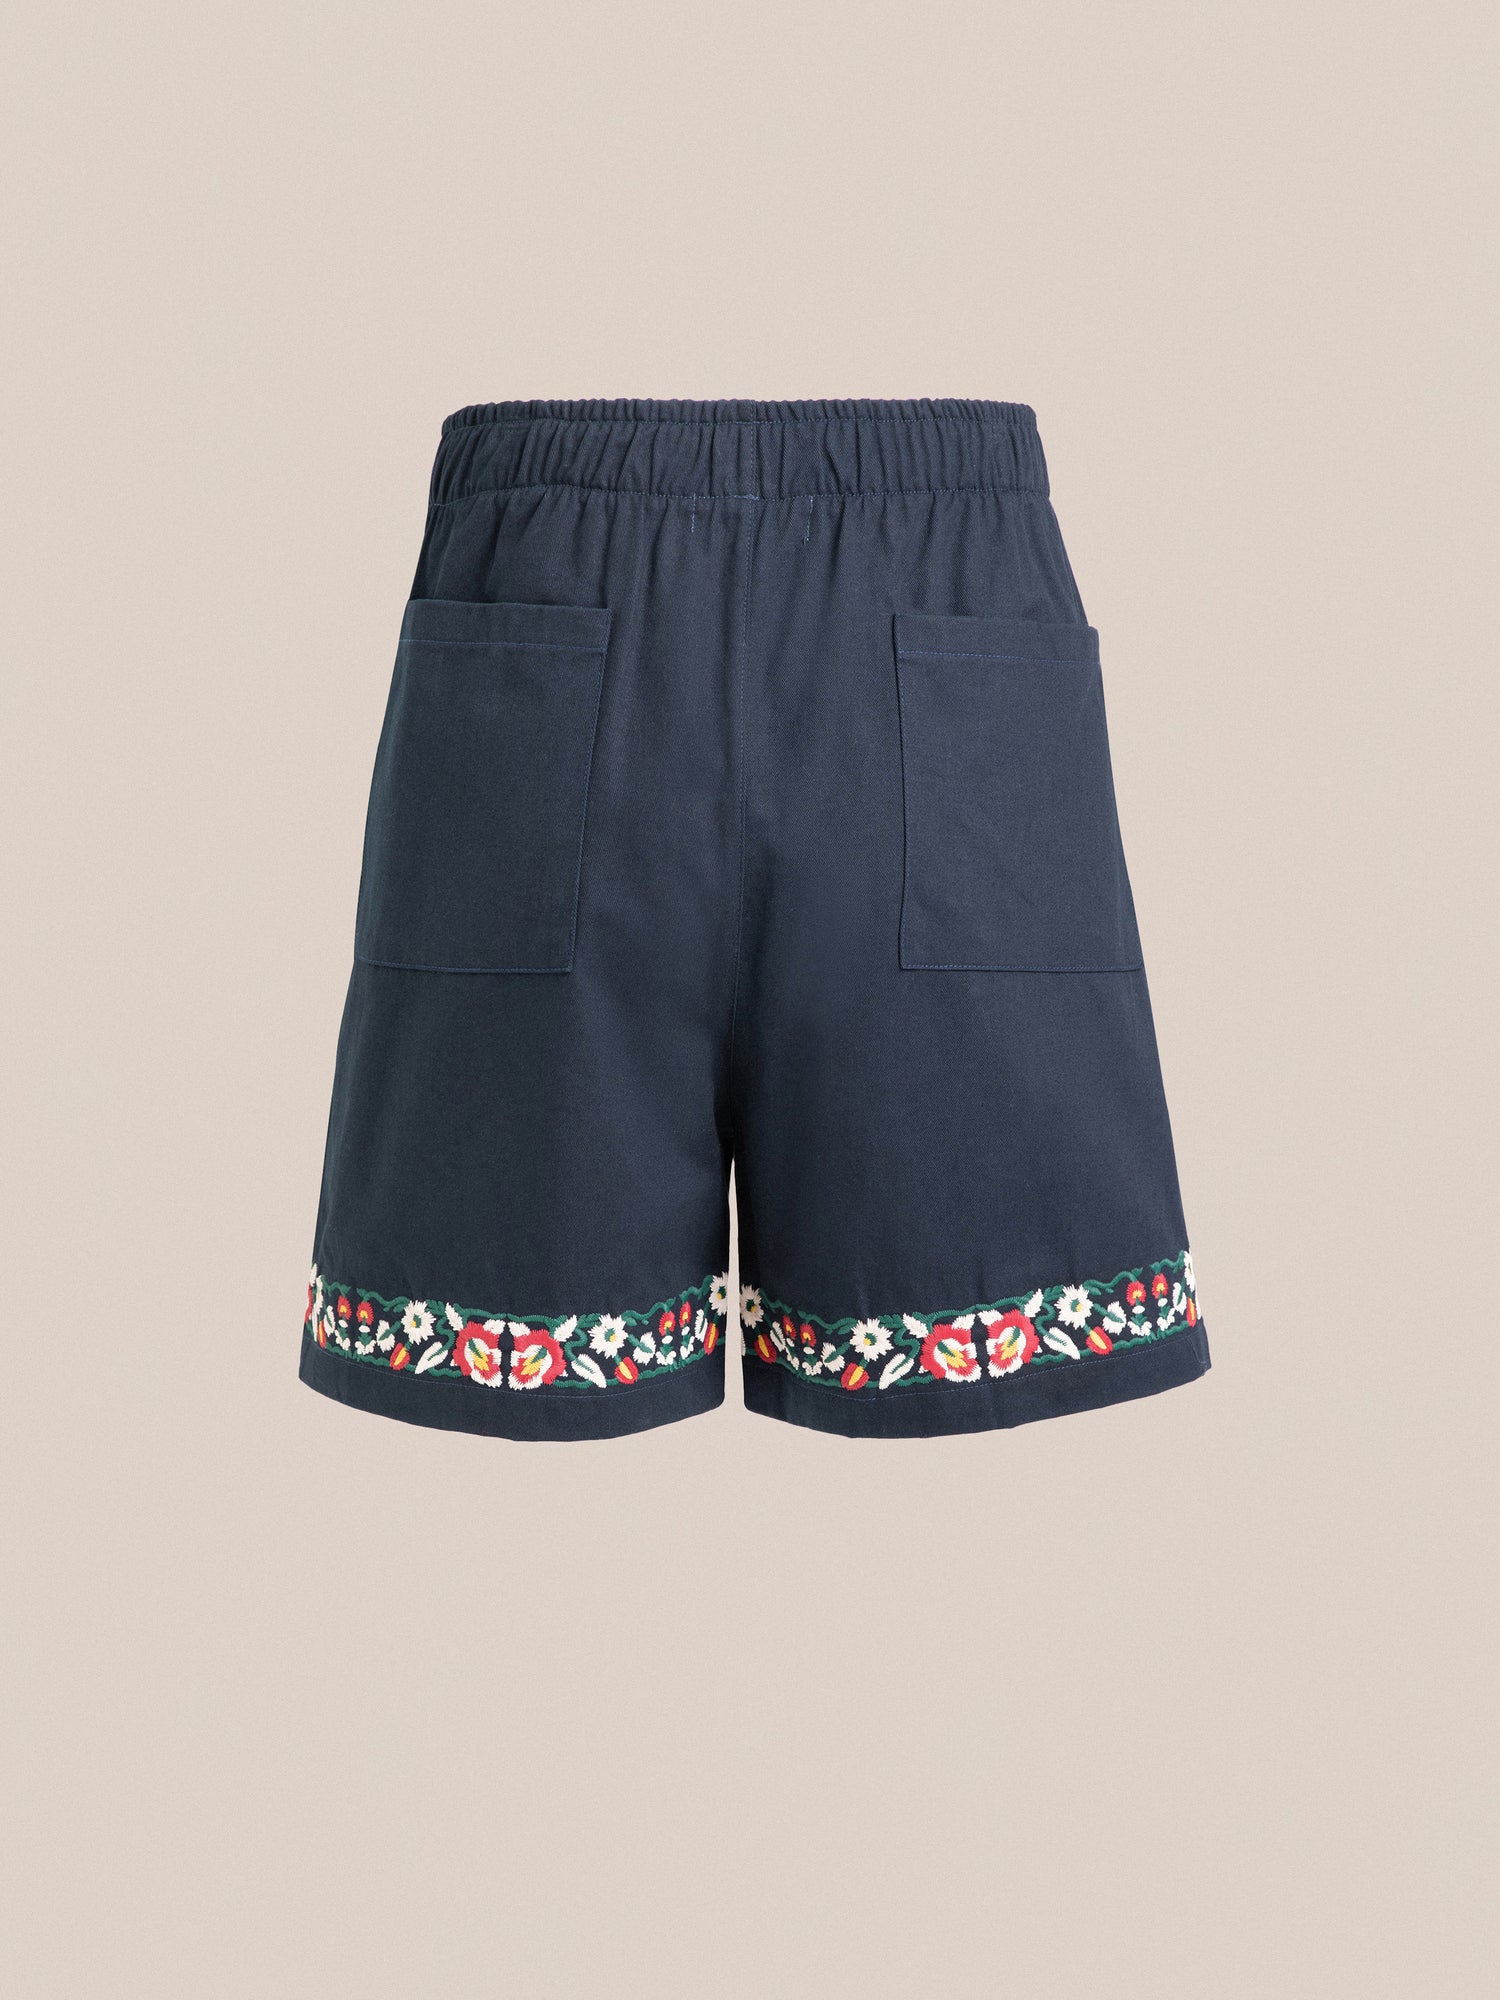 Navy blue Horse Equine Twill Shorts with floral embroidery along the hem, featuring elastic waistband and large front pockets, displayed against a neutral background by Found.